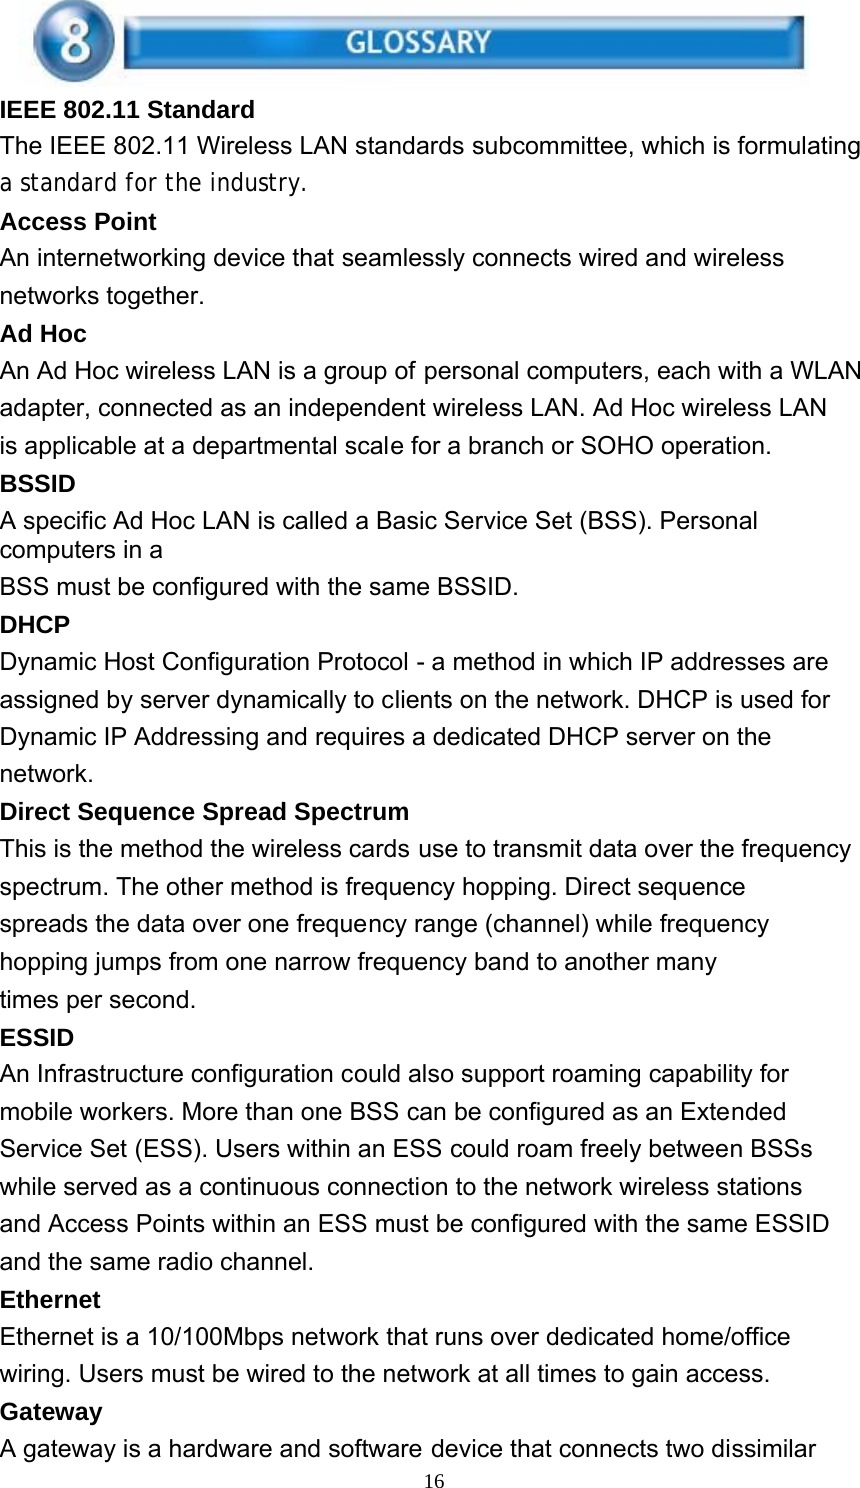 16    IEEE 802.11 Standard The IEEE 802.11 Wireless LAN standards subcommittee, which is formulating a standard for the industry. Access Point An internetworking device that seamlessly connects wired and wireless networks together. Ad Hoc An Ad Hoc wireless LAN is a group of personal computers, each with a WLAN adapter, connected as an independent wireless LAN. Ad Hoc wireless LAN is applicable at a departmental scale for a branch or SOHO operation. BSSID A specific Ad Hoc LAN is called a Basic Service Set (BSS). Personal computers in a BSS must be configured with the same BSSID. DHCP Dynamic Host Configuration Protocol - a method in which IP addresses are assigned by server dynamically to clients on the network. DHCP is used for Dynamic IP Addressing and requires a dedicated DHCP server on the network. Direct Sequence Spread Spectrum This is the method the wireless cards use to transmit data over the frequency spectrum. The other method is frequency hopping. Direct sequence spreads the data over one frequency range (channel) while frequency hopping jumps from one narrow frequency band to another many times per second. ESSID An Infrastructure configuration could also support roaming capability for mobile workers. More than one BSS can be configured as an Extended Service Set (ESS). Users within an ESS could roam freely between BSSs while served as a continuous connection to the network wireless stations and Access Points within an ESS must be configured with the same ESSID and the same radio channel. Ethernet Ethernet is a 10/100Mbps network that runs over dedicated home/office wiring. Users must be wired to the network at all times to gain access. Gateway A gateway is a hardware and software device that connects two dissimilar 